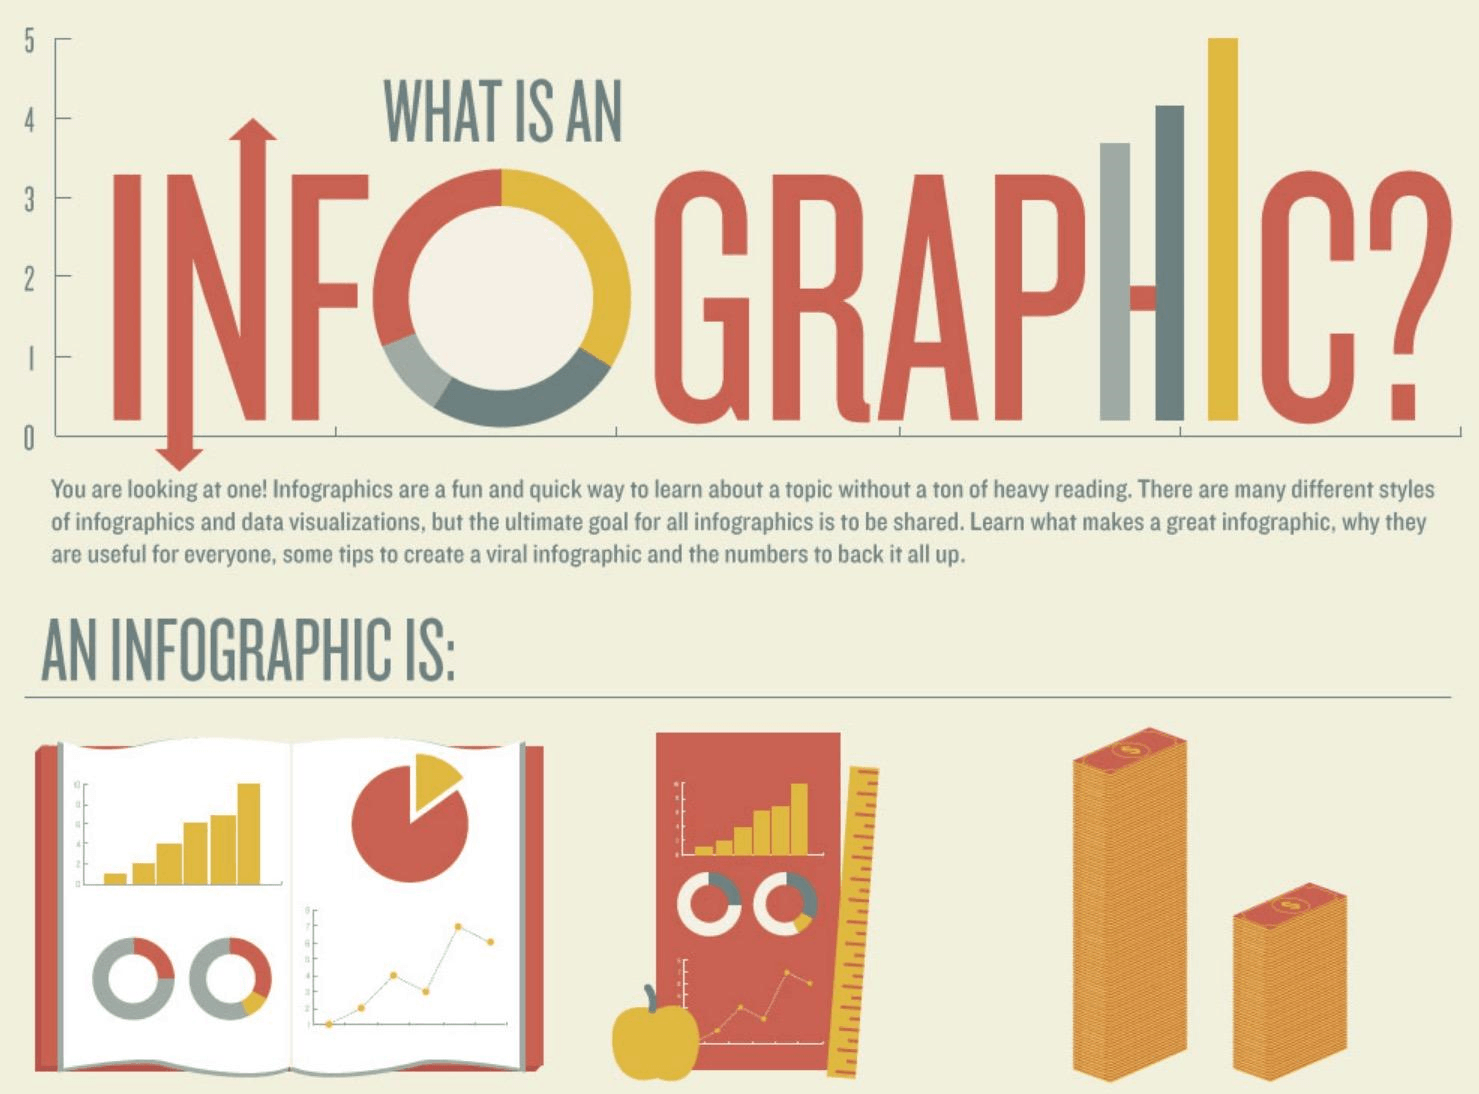 An infographic about what an infographic is. Infographic-ception.